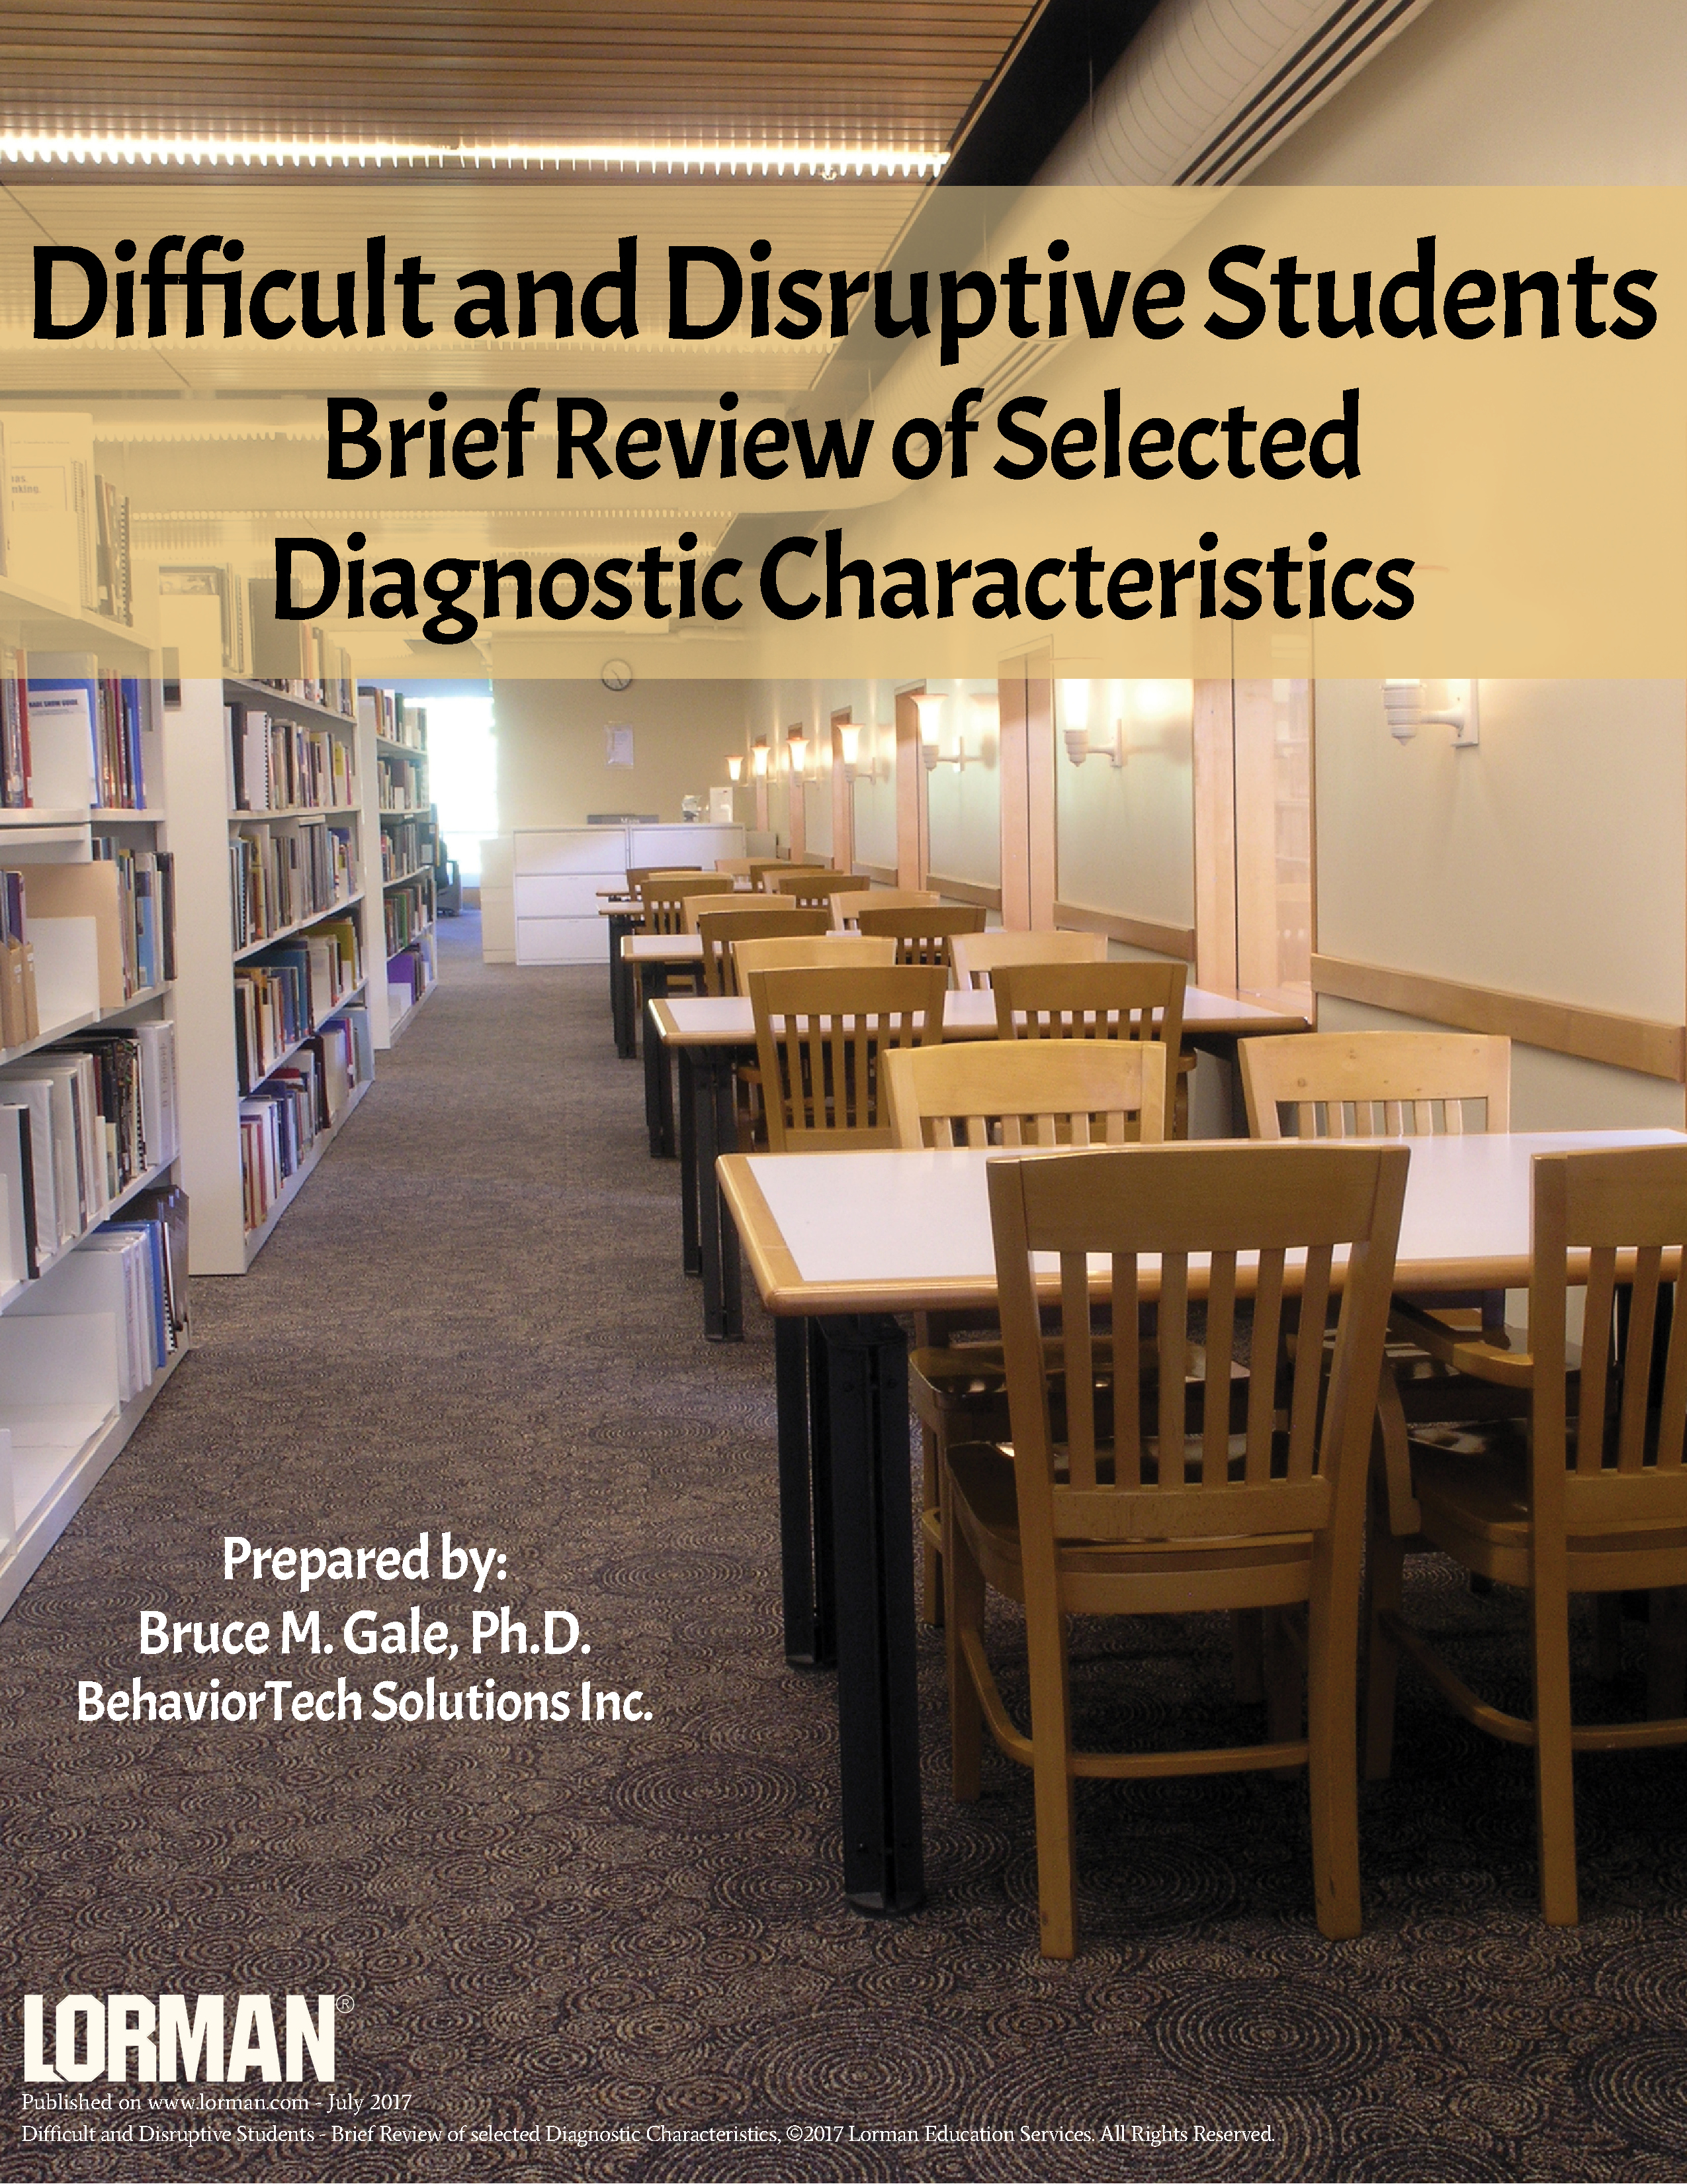 Difficult and Disruptive Students - Brief Review of selected Diagnostic Characteristics